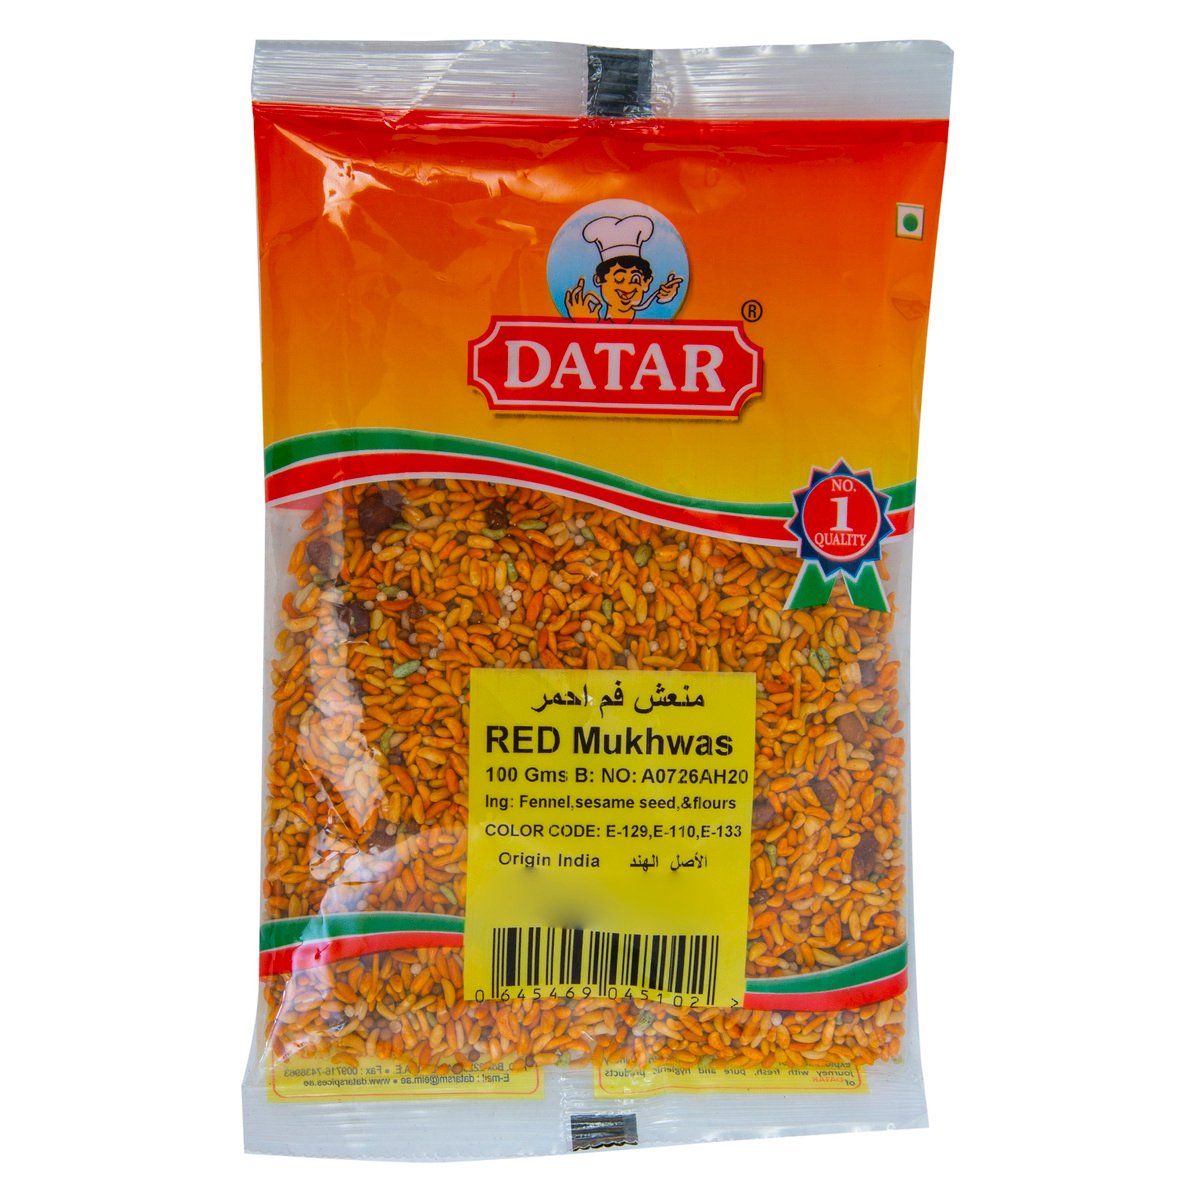 Datar Red Mukhwas, 100 g